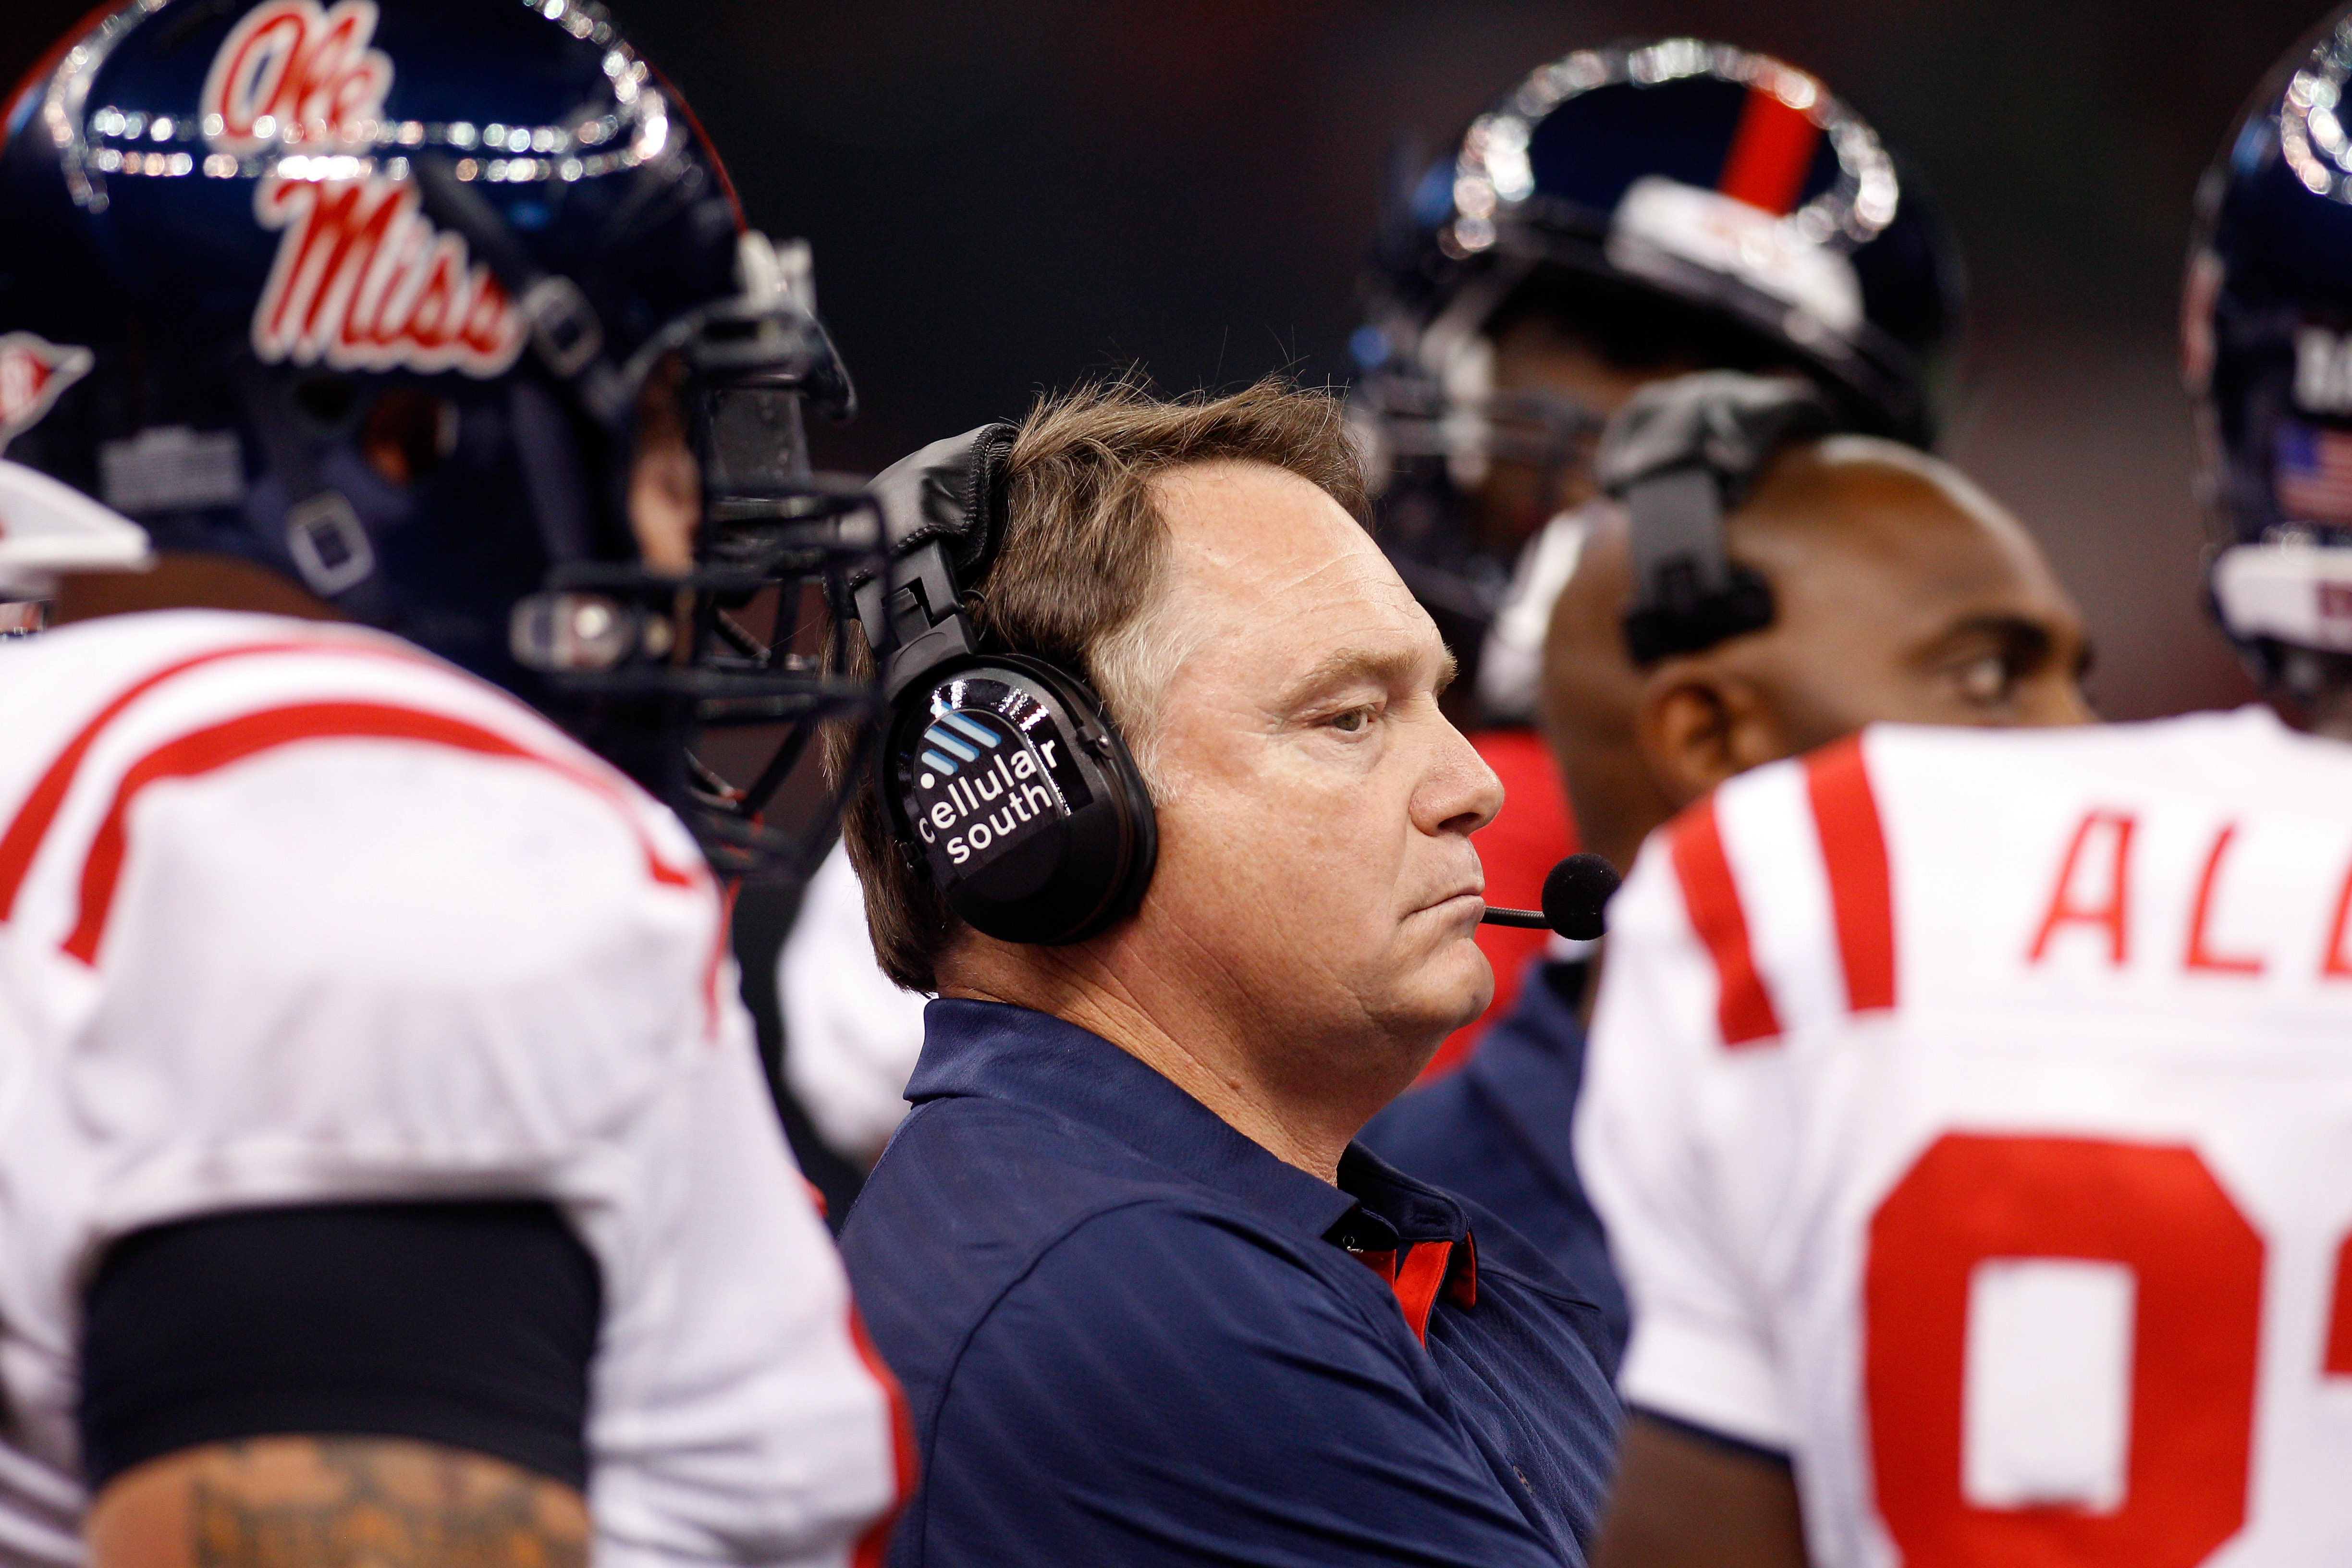 NEW ORLEANS - SEPTEMBER 11:  Head coach Houston Nutt of the Ole Miss Rebels watches a play from the sidelines during the game against the Tulane Green Wave at the Louisiana Superdome on September 11, 2010 in New Orleans, Louisiana.  (Photo by Chris Grayth